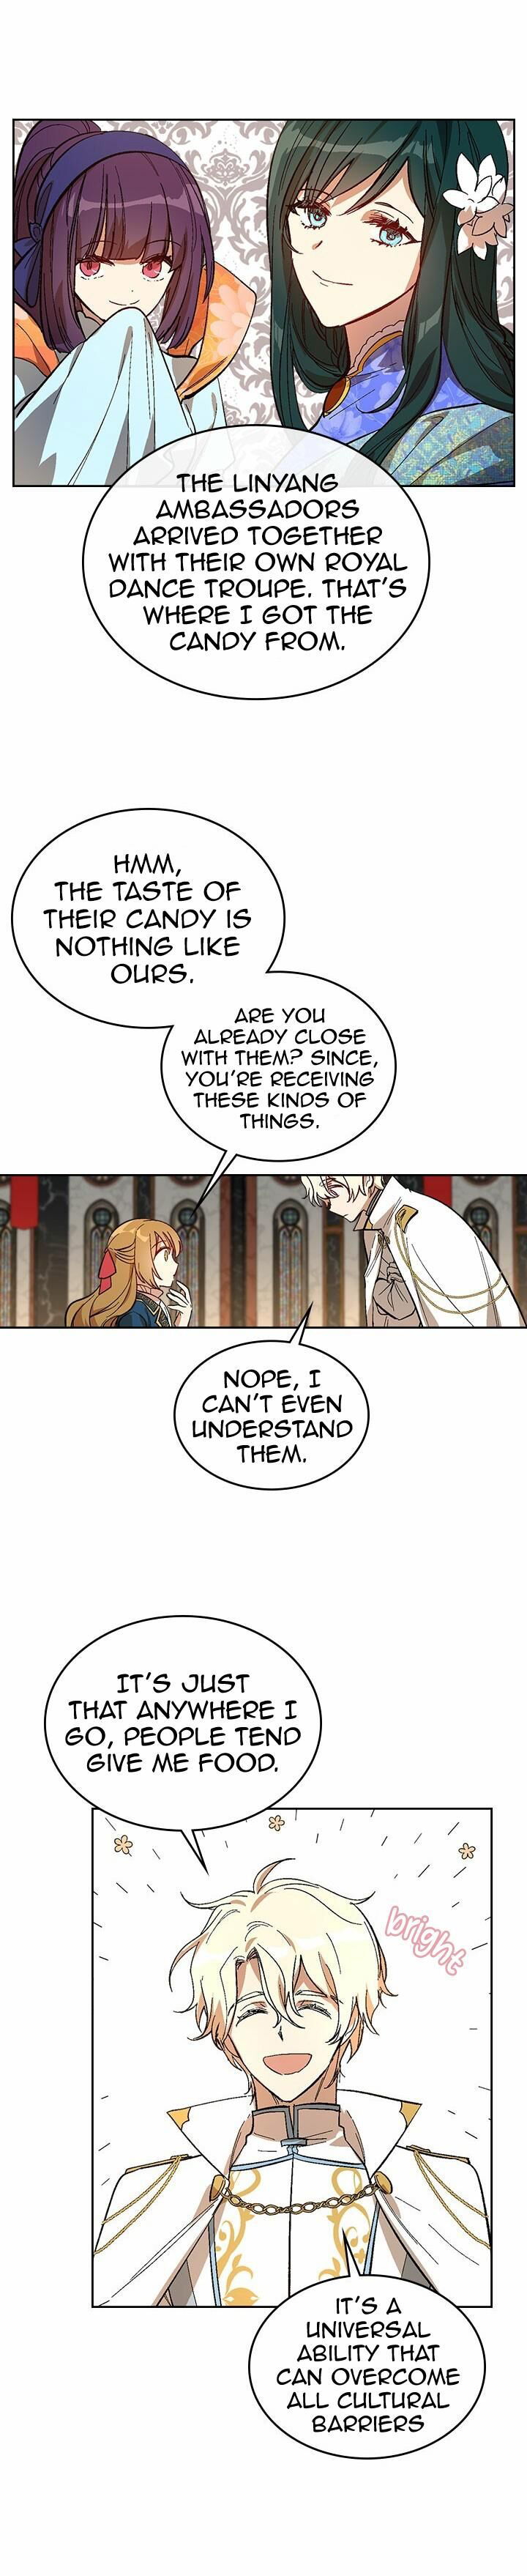 The Reason Why Raeliana Ended Up at the Duke's Mansion Chapter 091 page 2